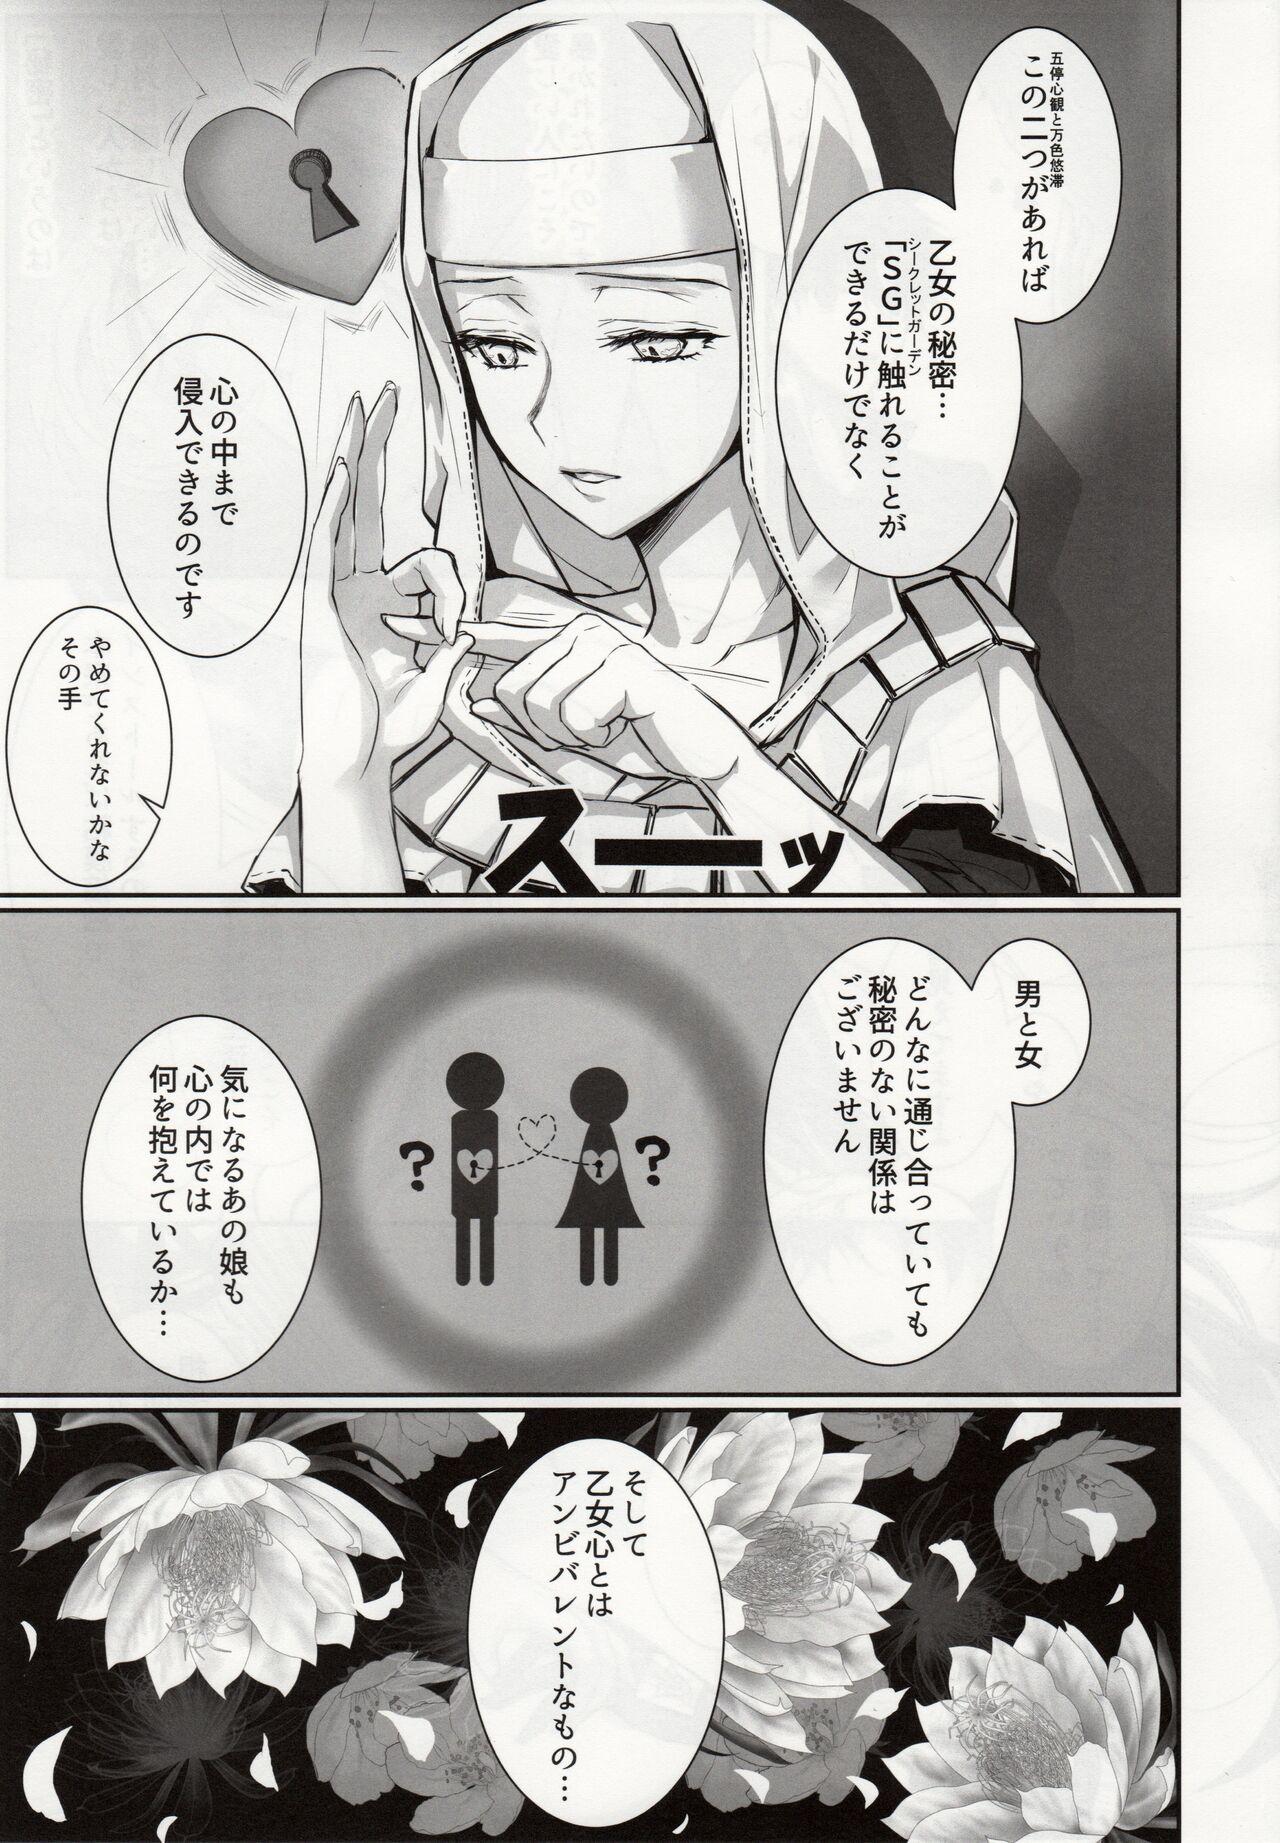 Nalgas the innermoSt of the Girl - Fate grand order Watersports - Page 4